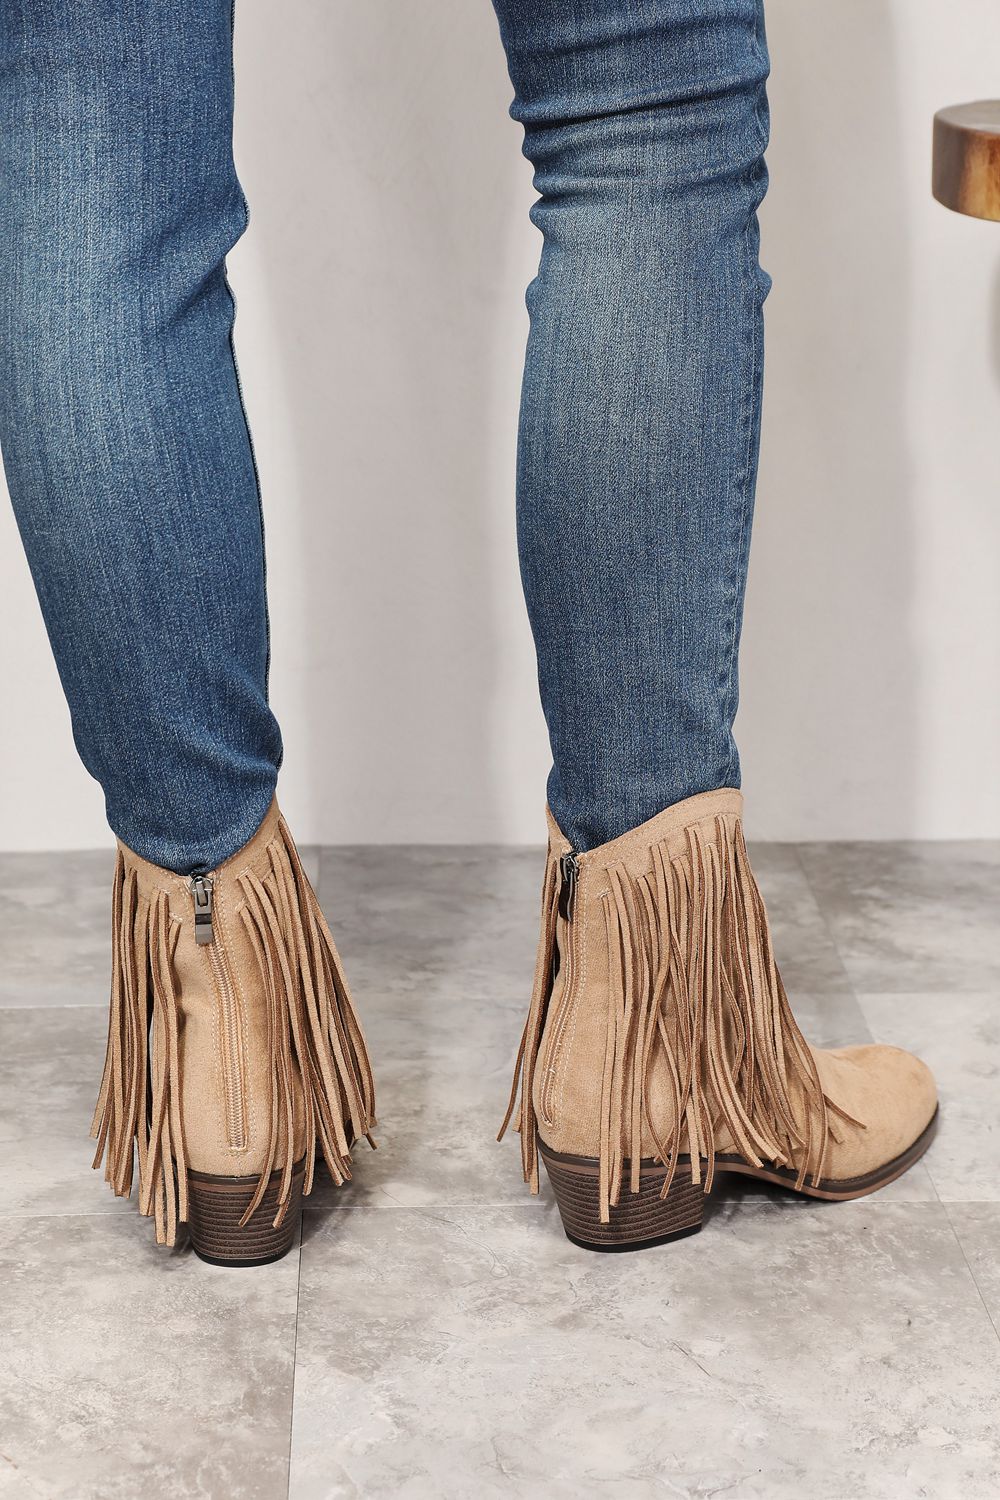 Fringe Cowboy Western Ankle Boots in Tan